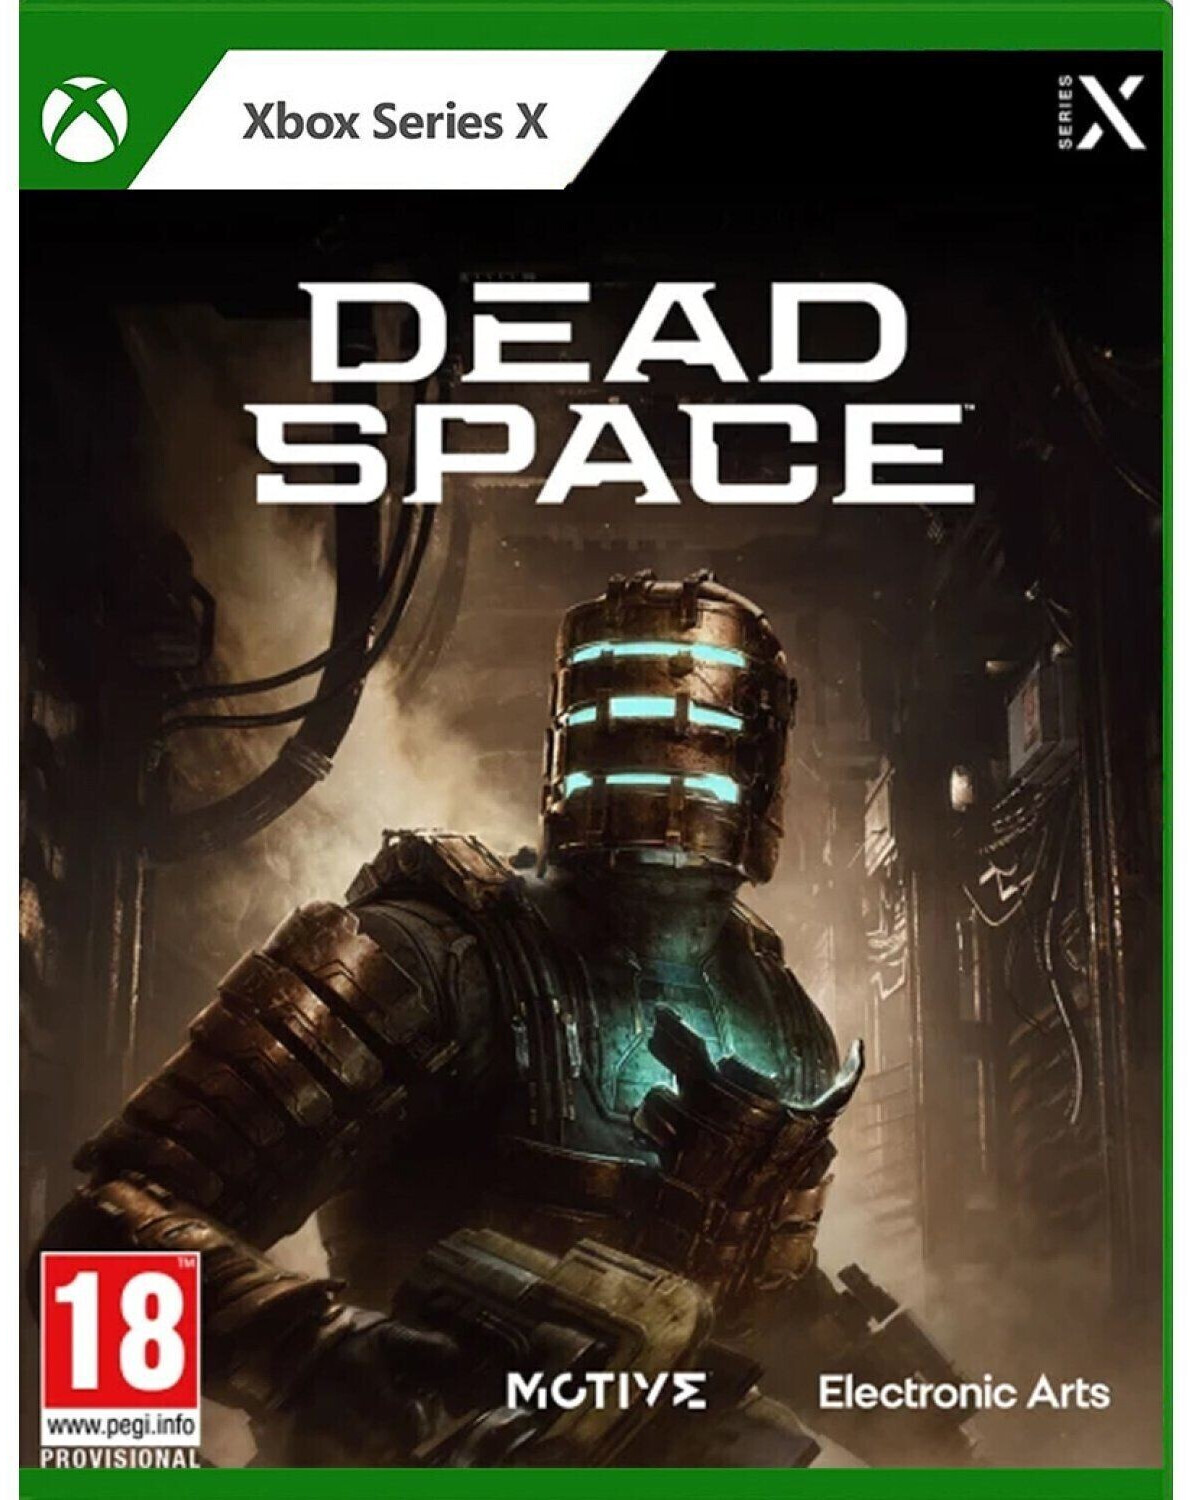 Photos - Game Electronic Arts Dead Space (Remake)  (Xbox Series X)